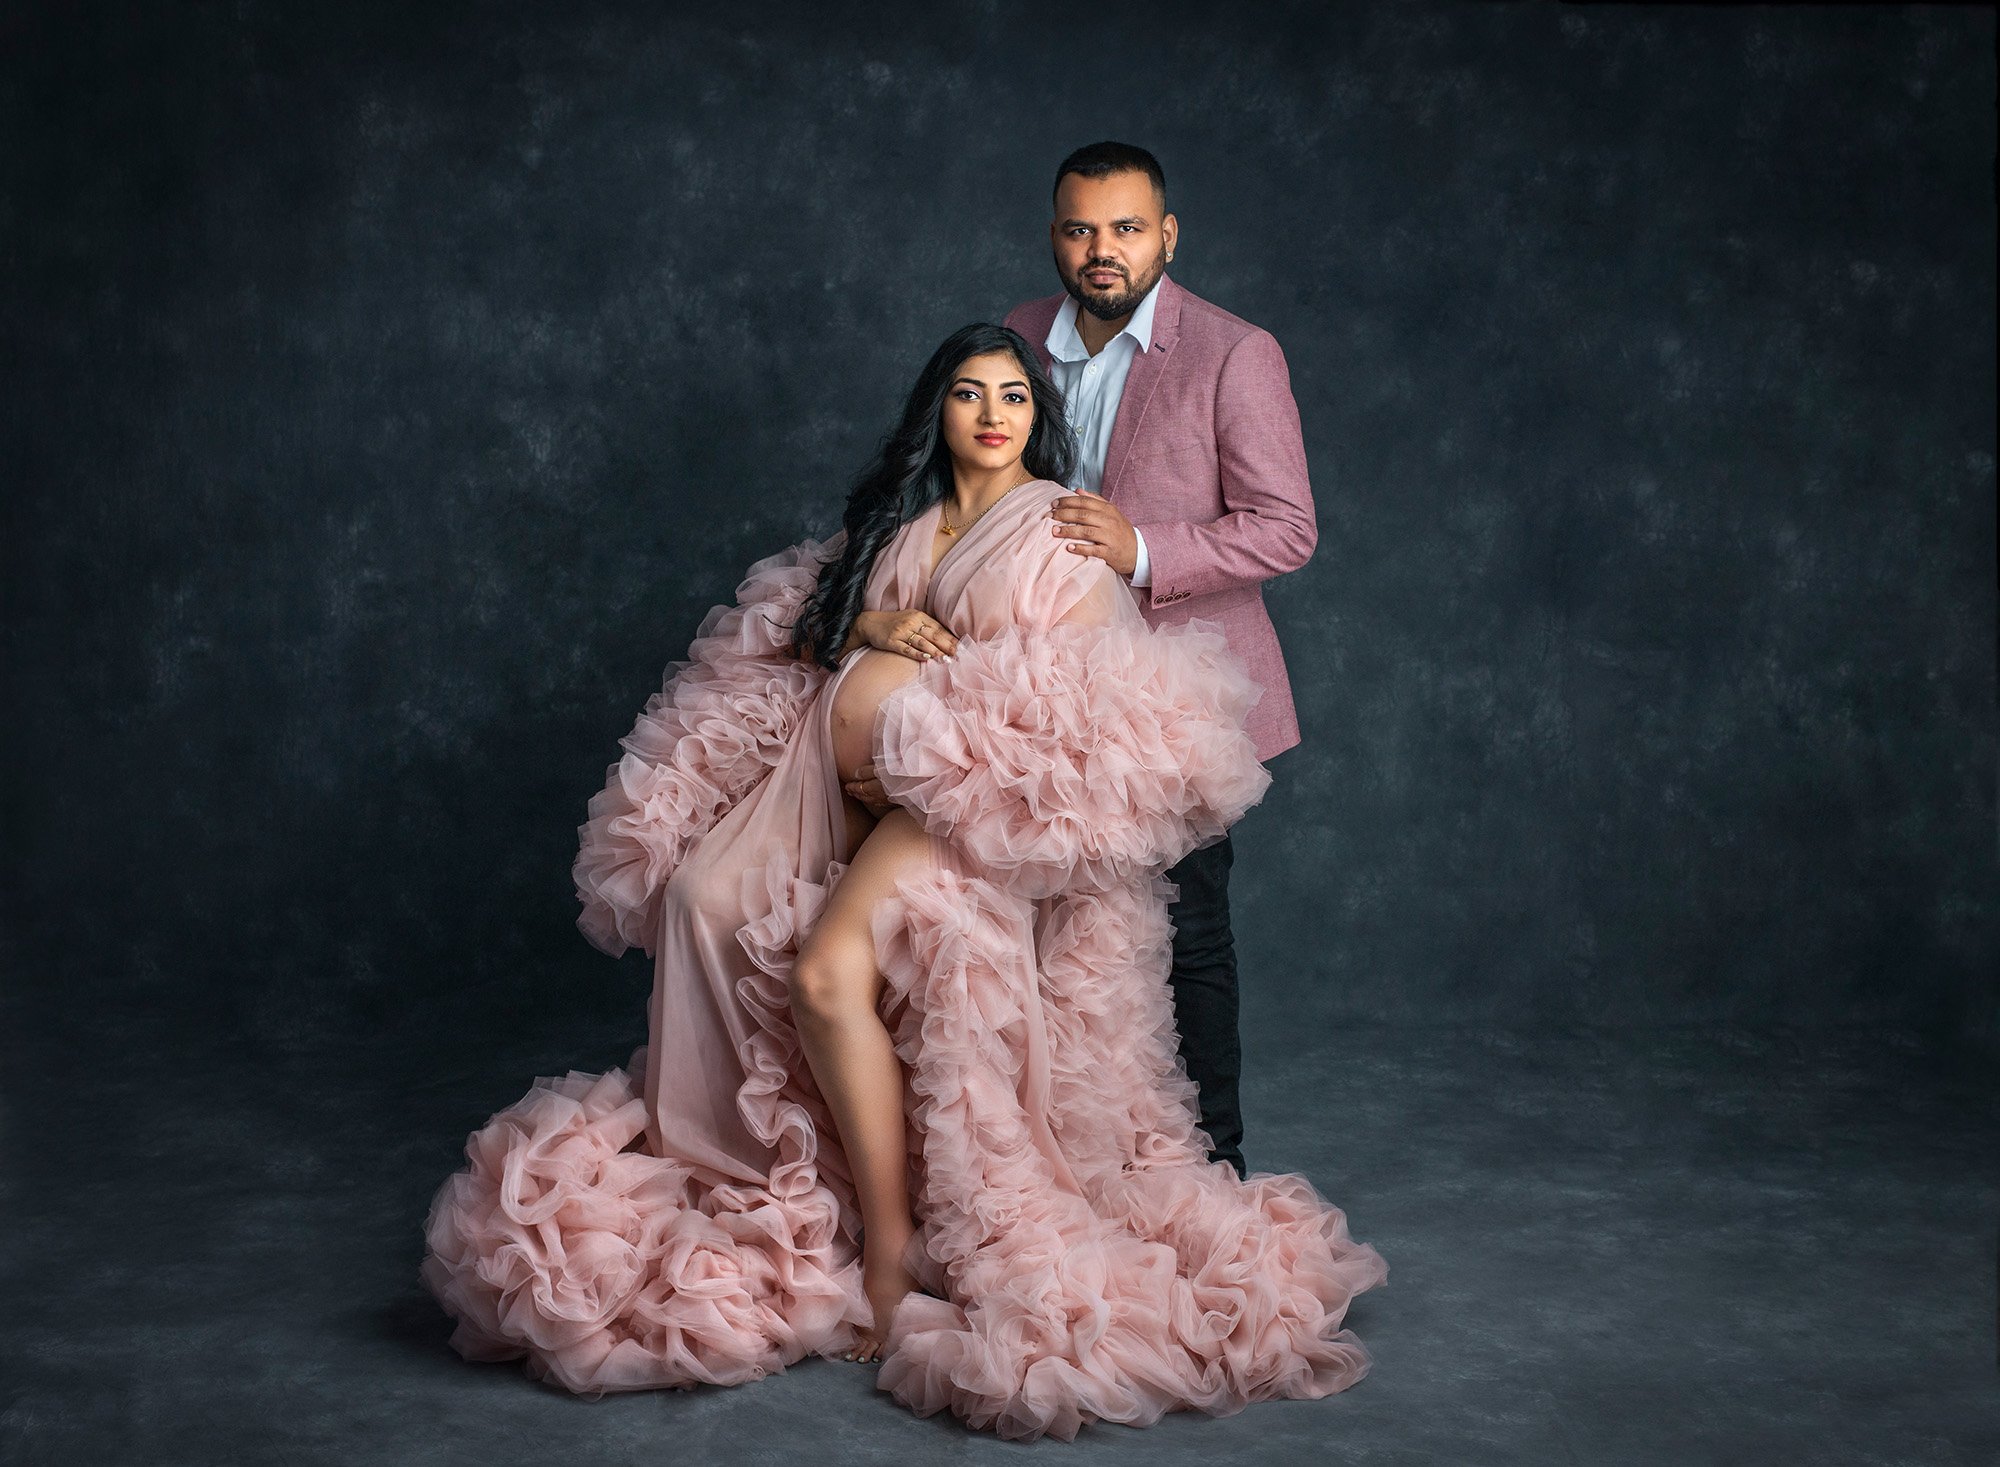 pregnant woman posing with partner wearing ruffled pink dress exposing pregnant stomach